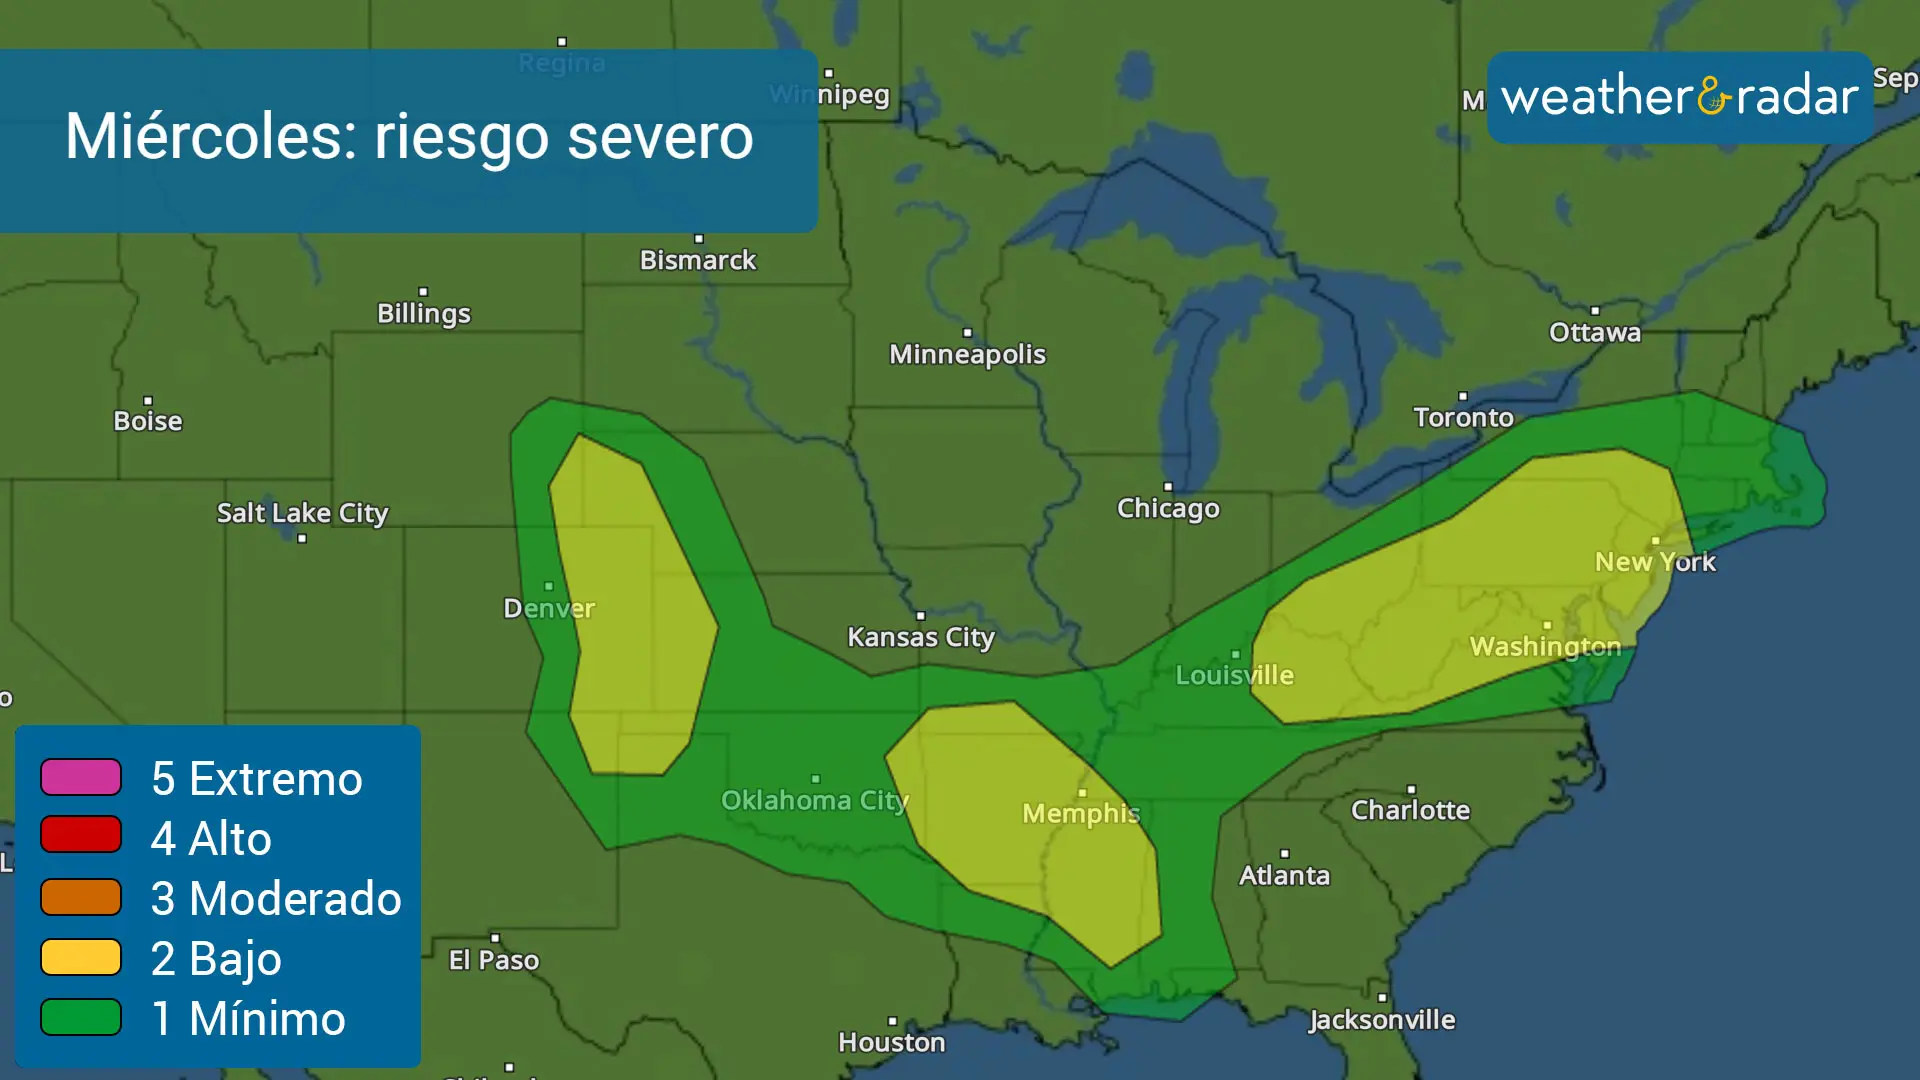 Today's severe storm risk